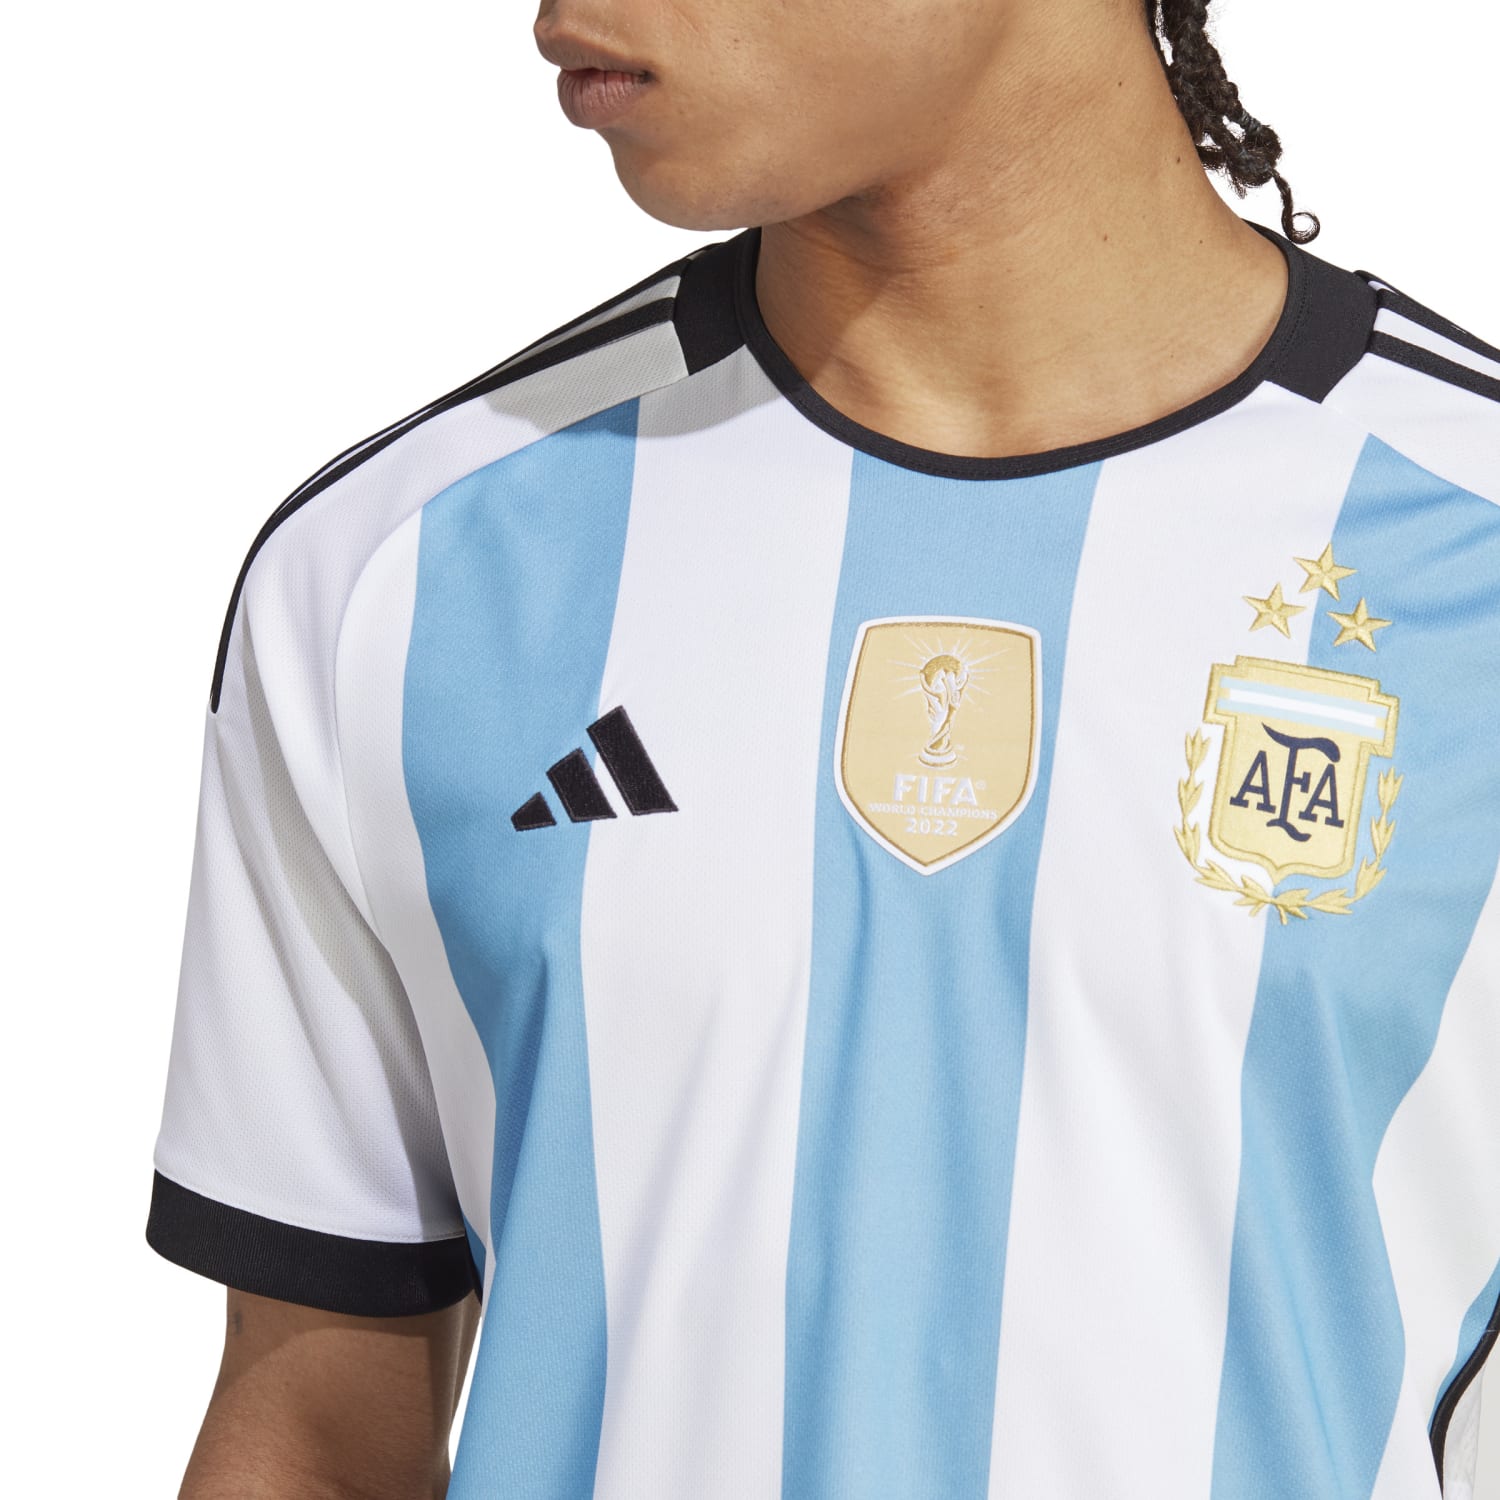 argentina jersey 2022 world cup canada